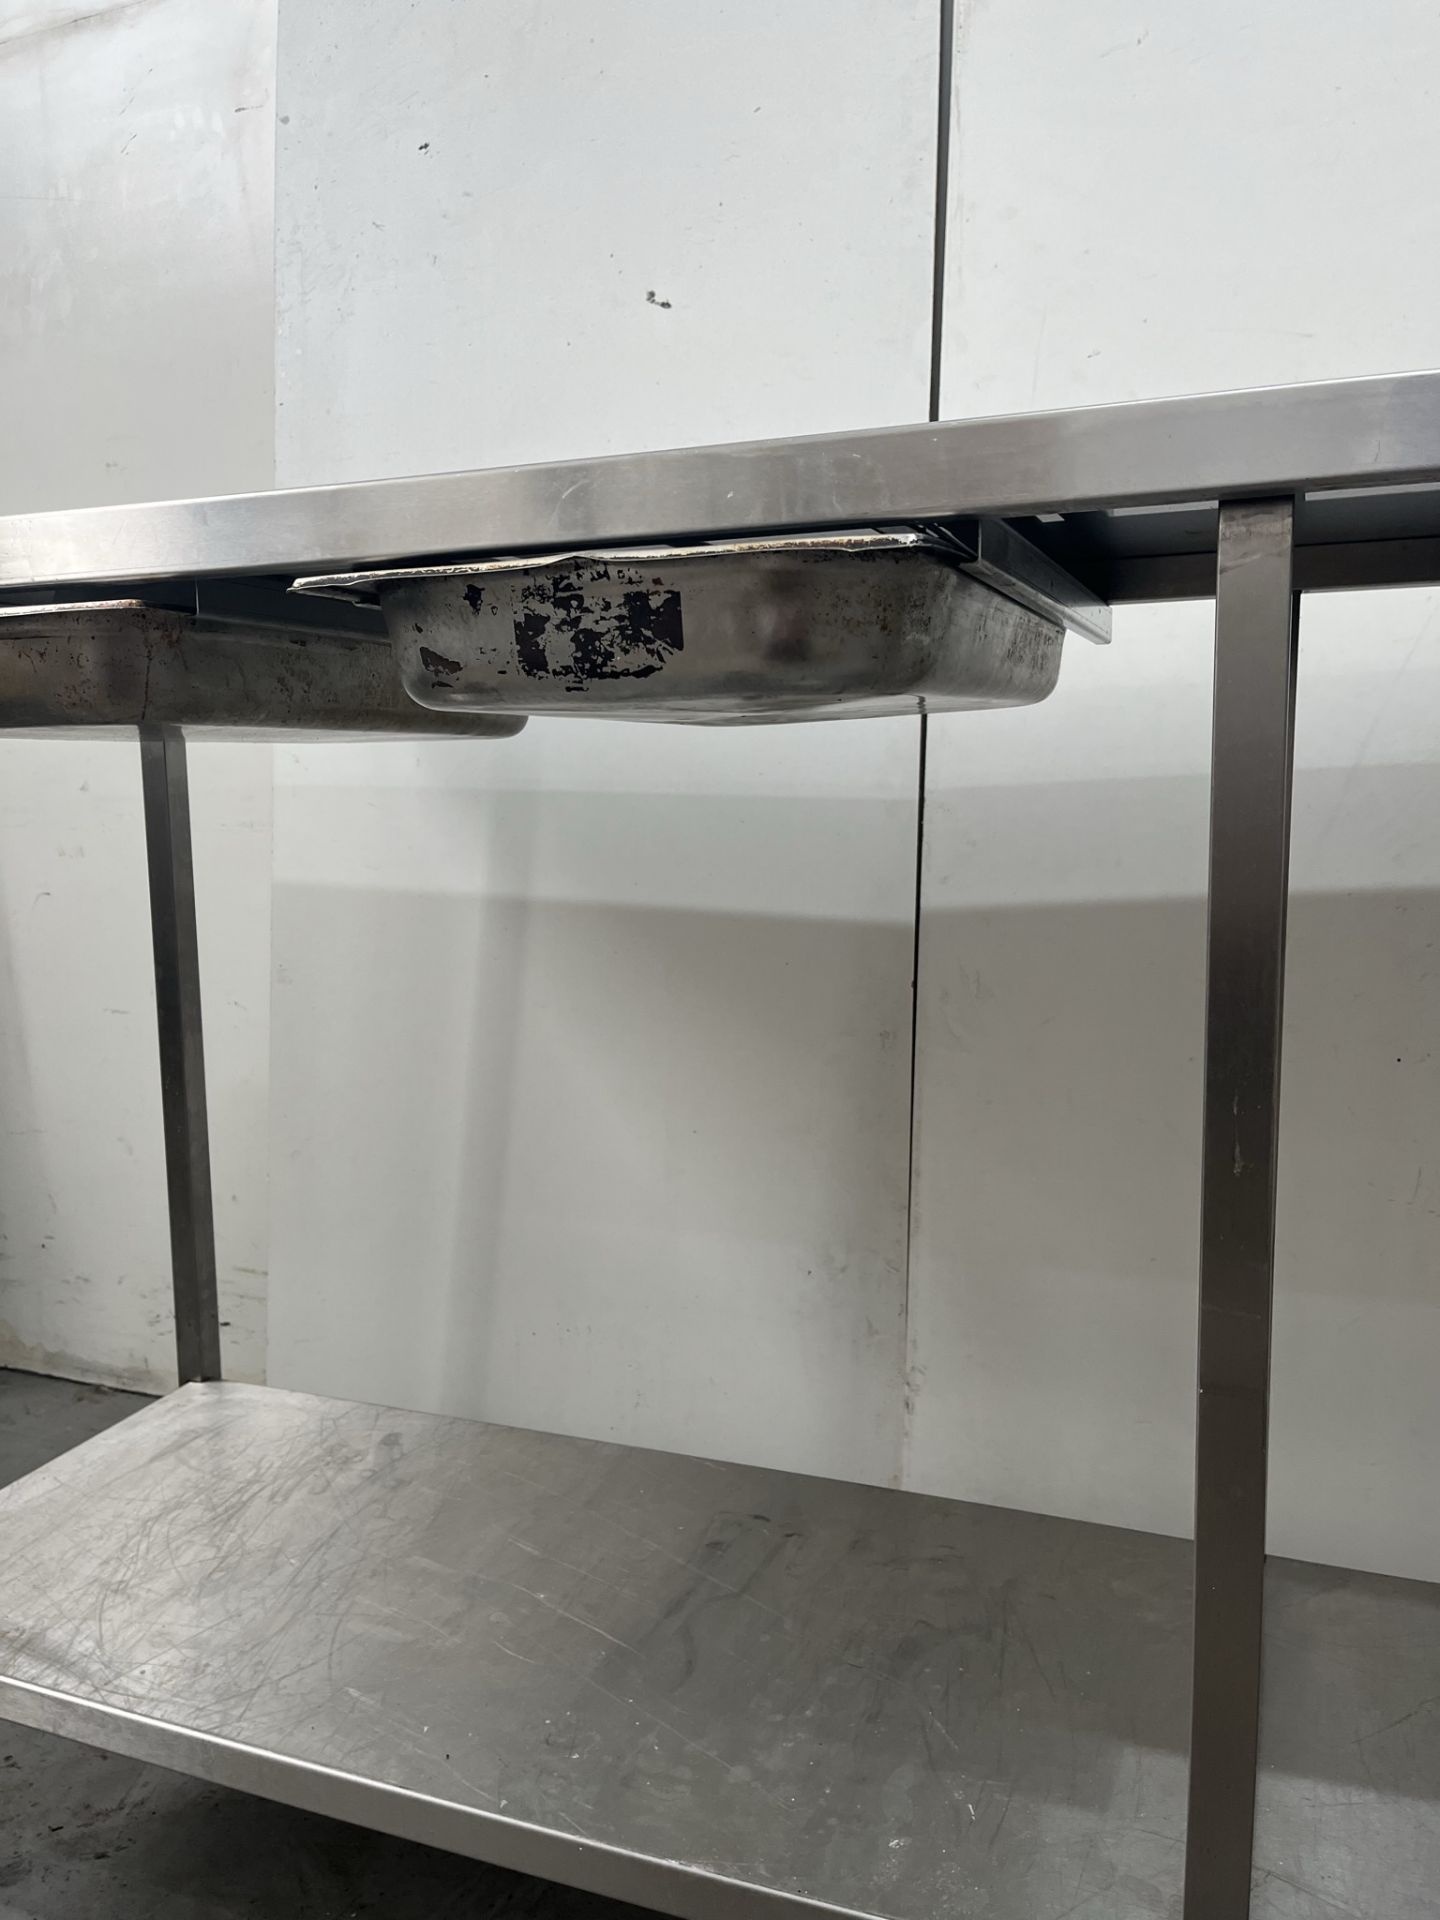 Commercial Stainless Steel Catering Table With Bottom Shelf & Trays - Image 9 of 14